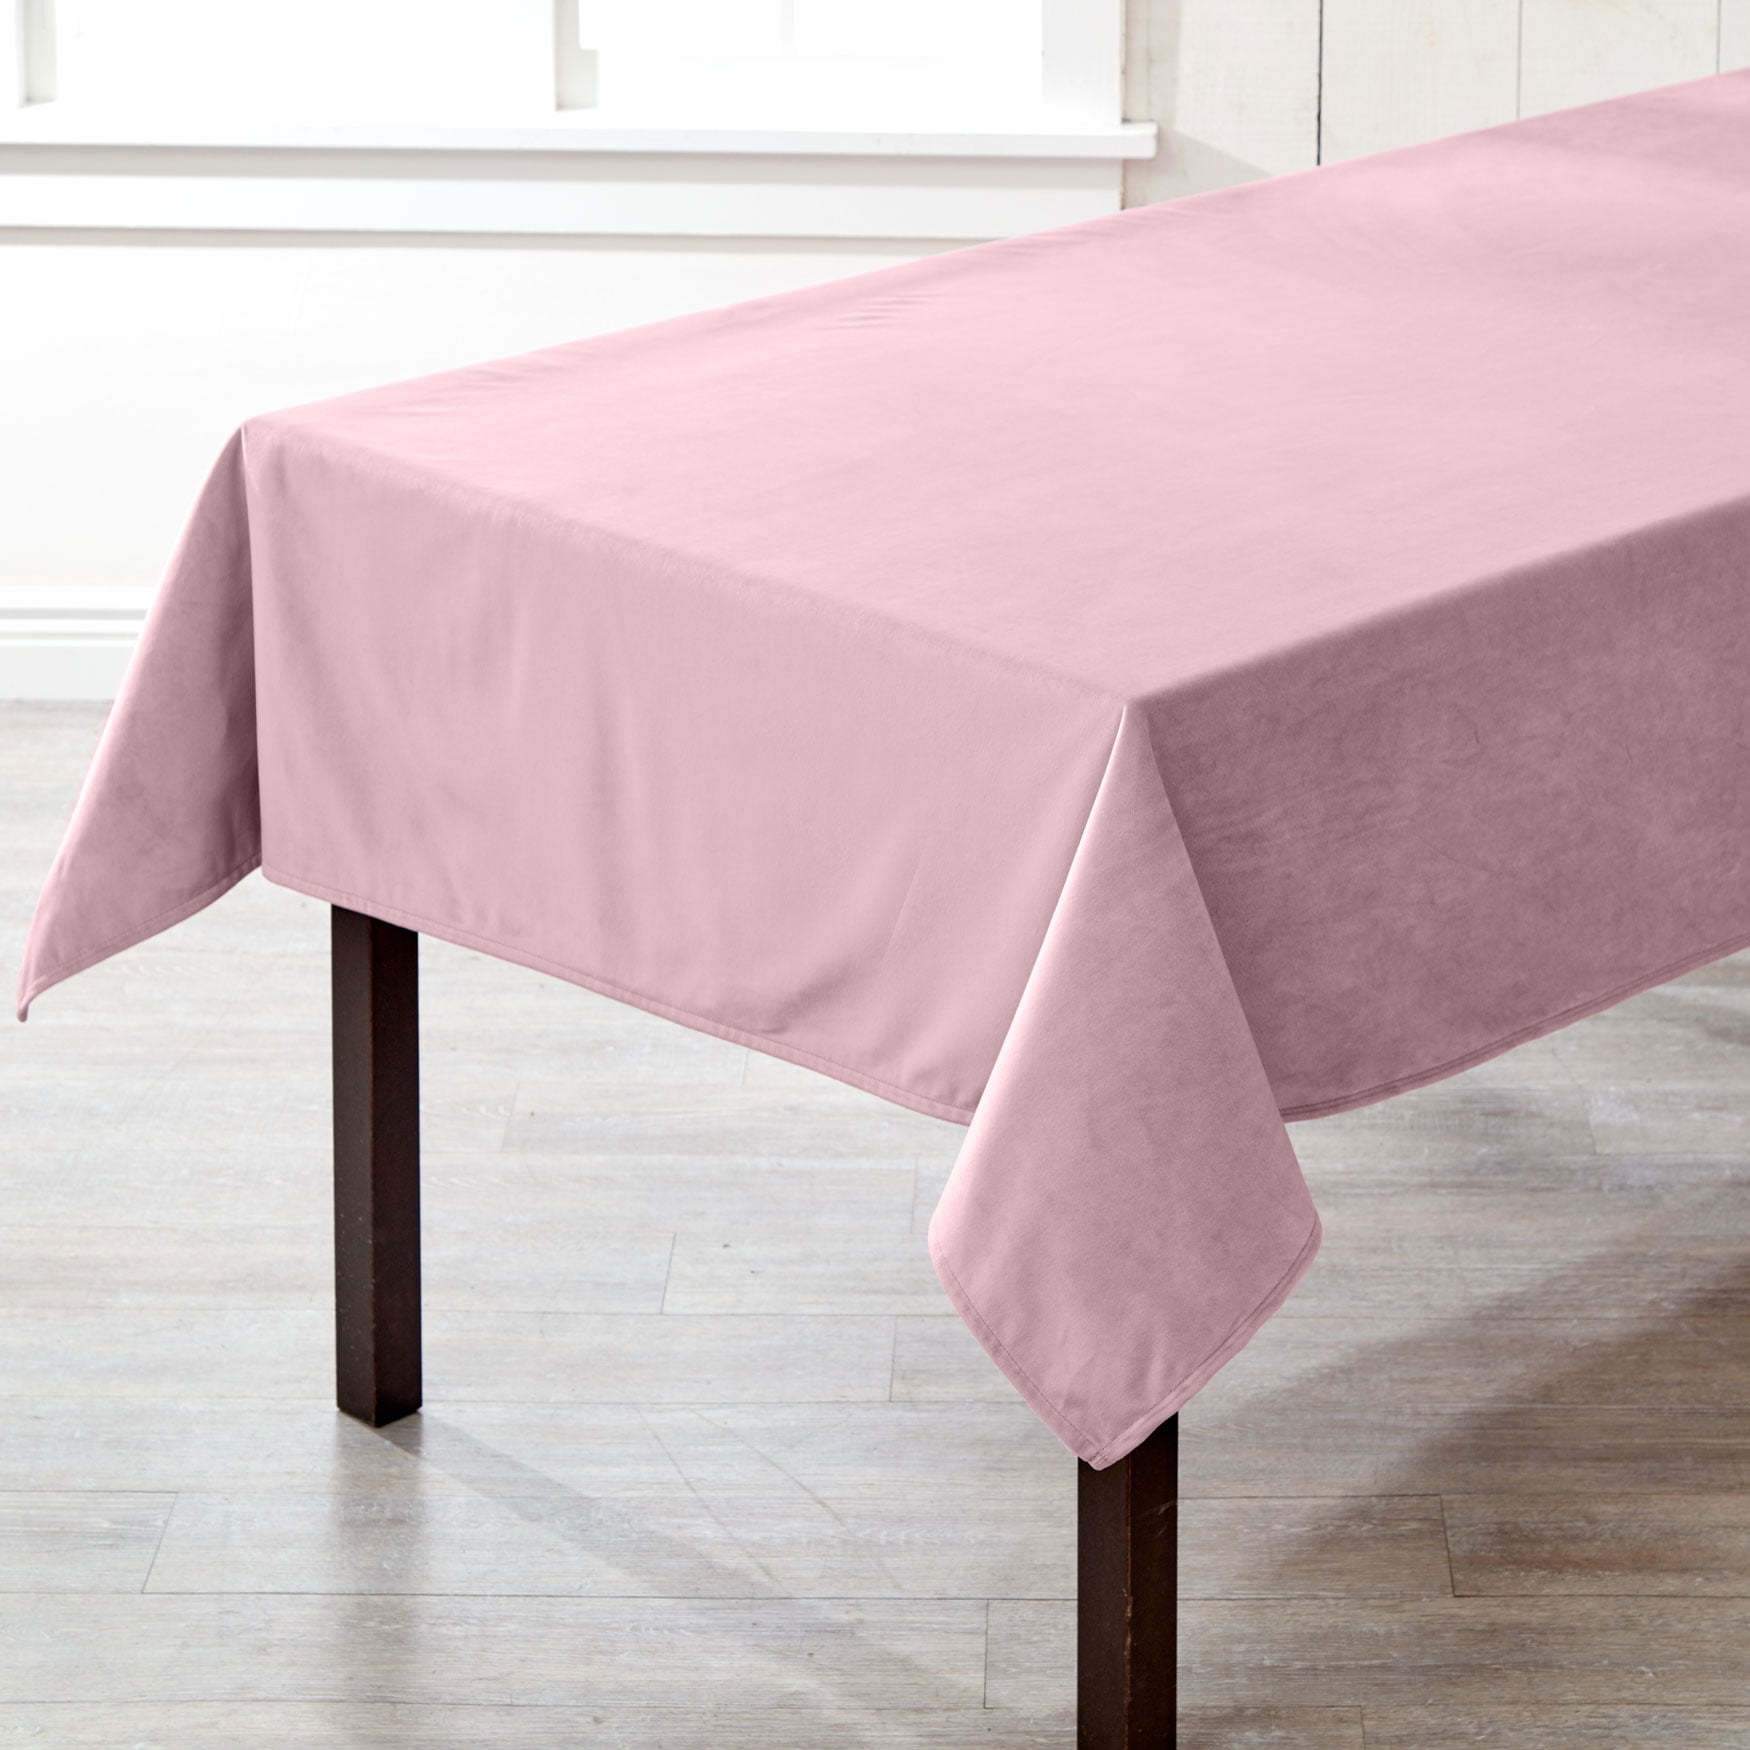 Autumn Vine Damask Tablecloth Oblong 60"x84" in Wine